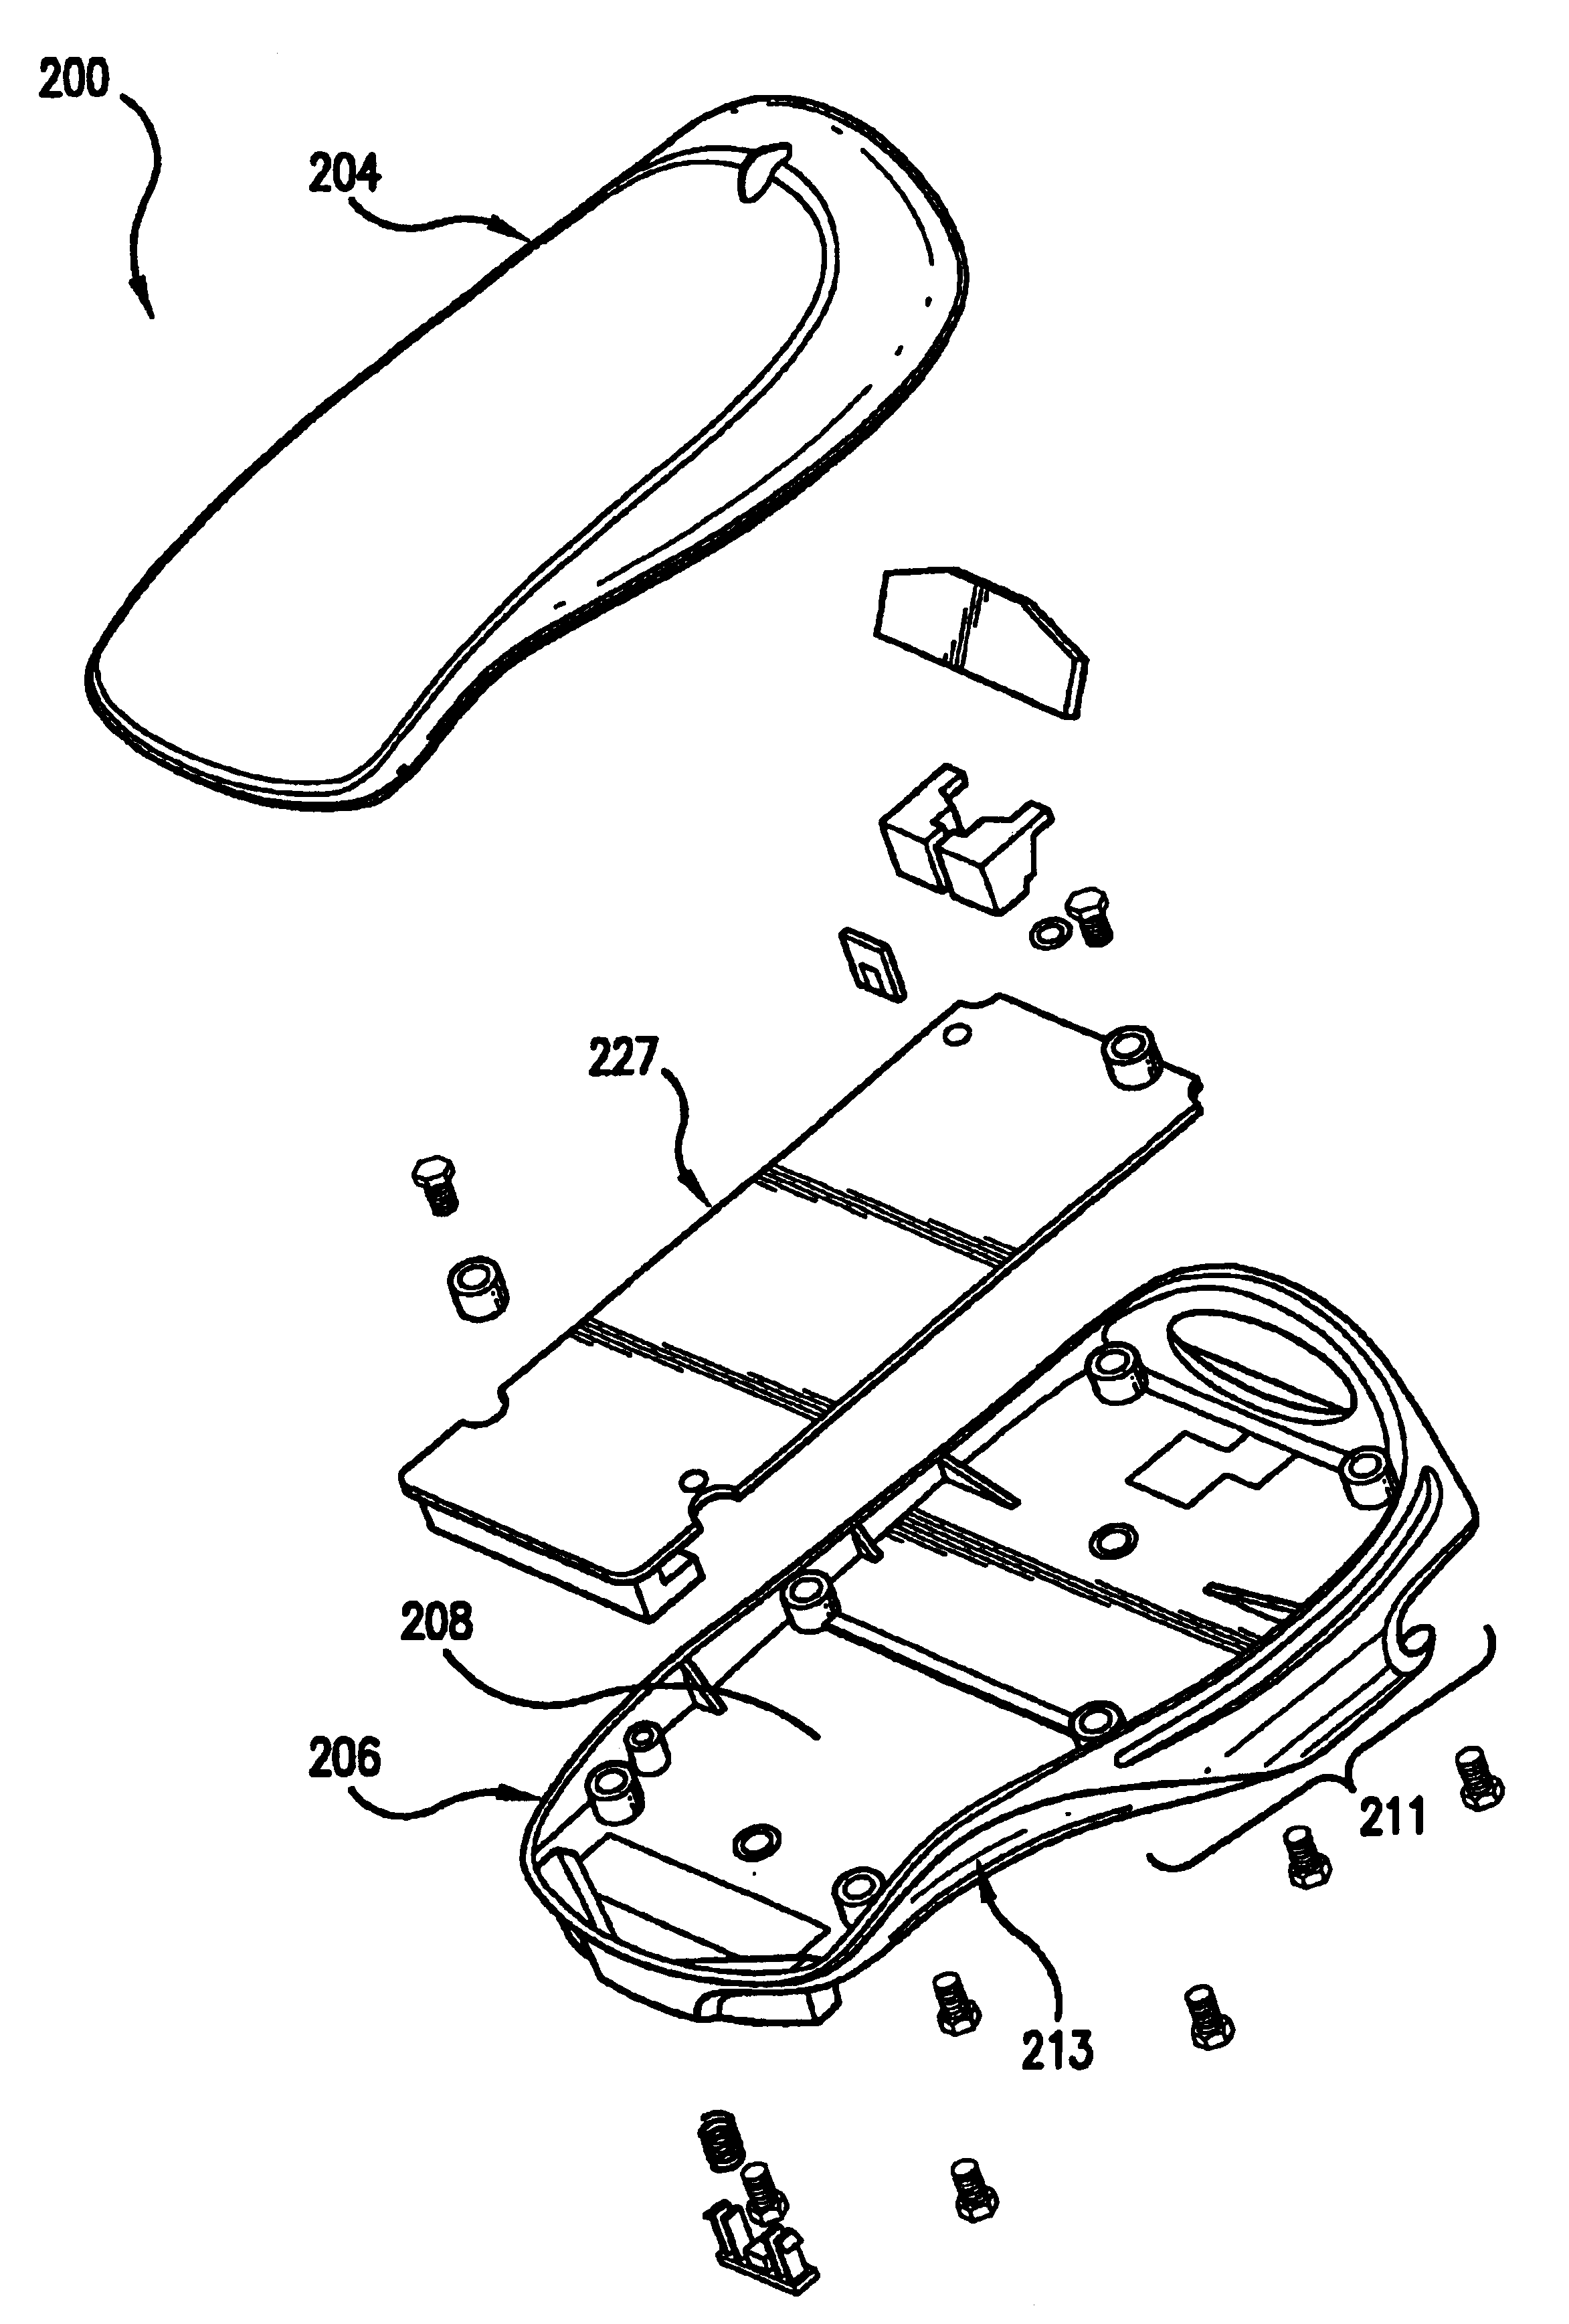 Adapter unit having a handle grip for a personal digital assistant